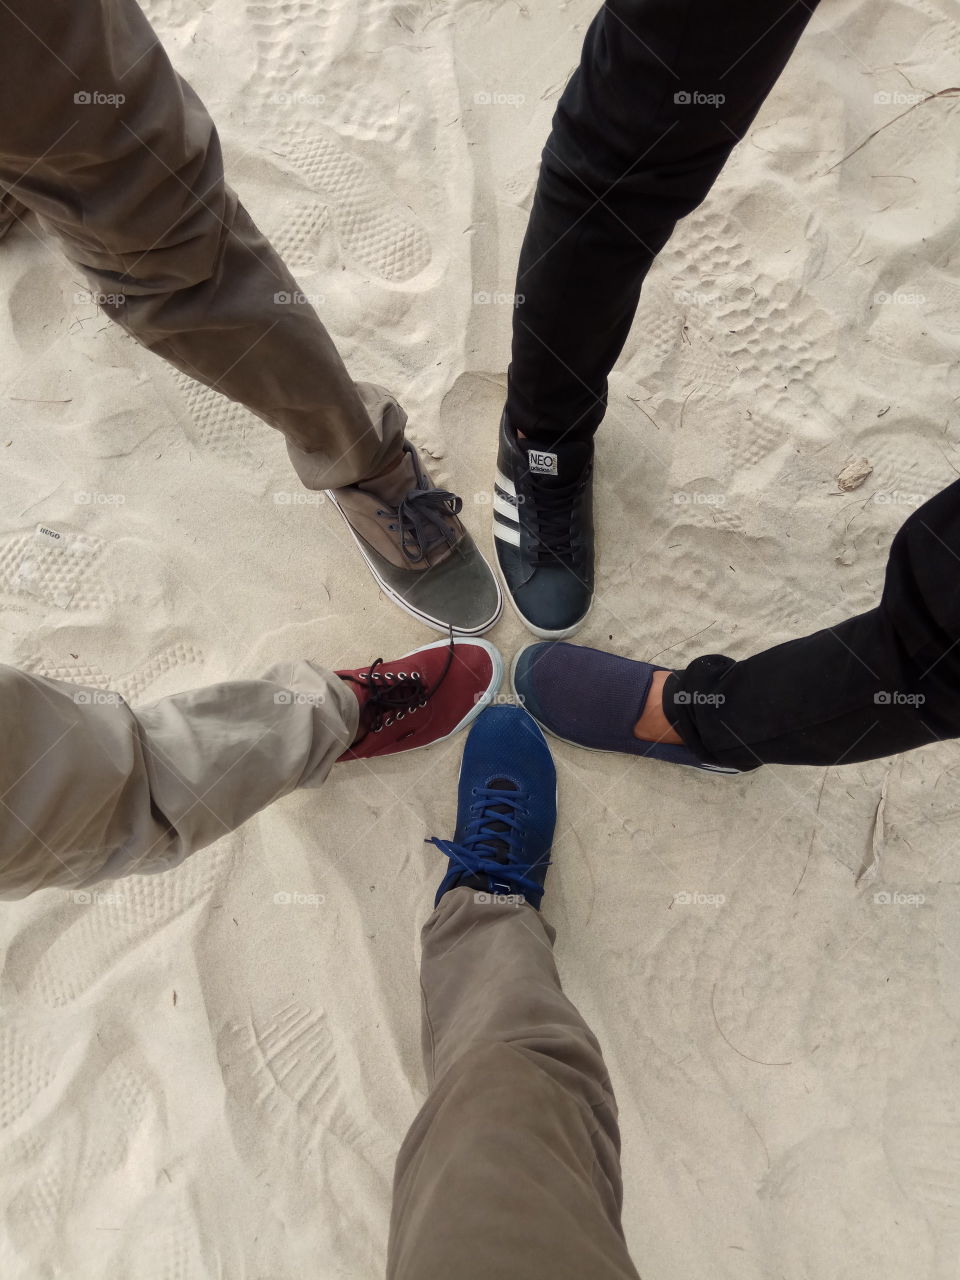 Shoes on the sand